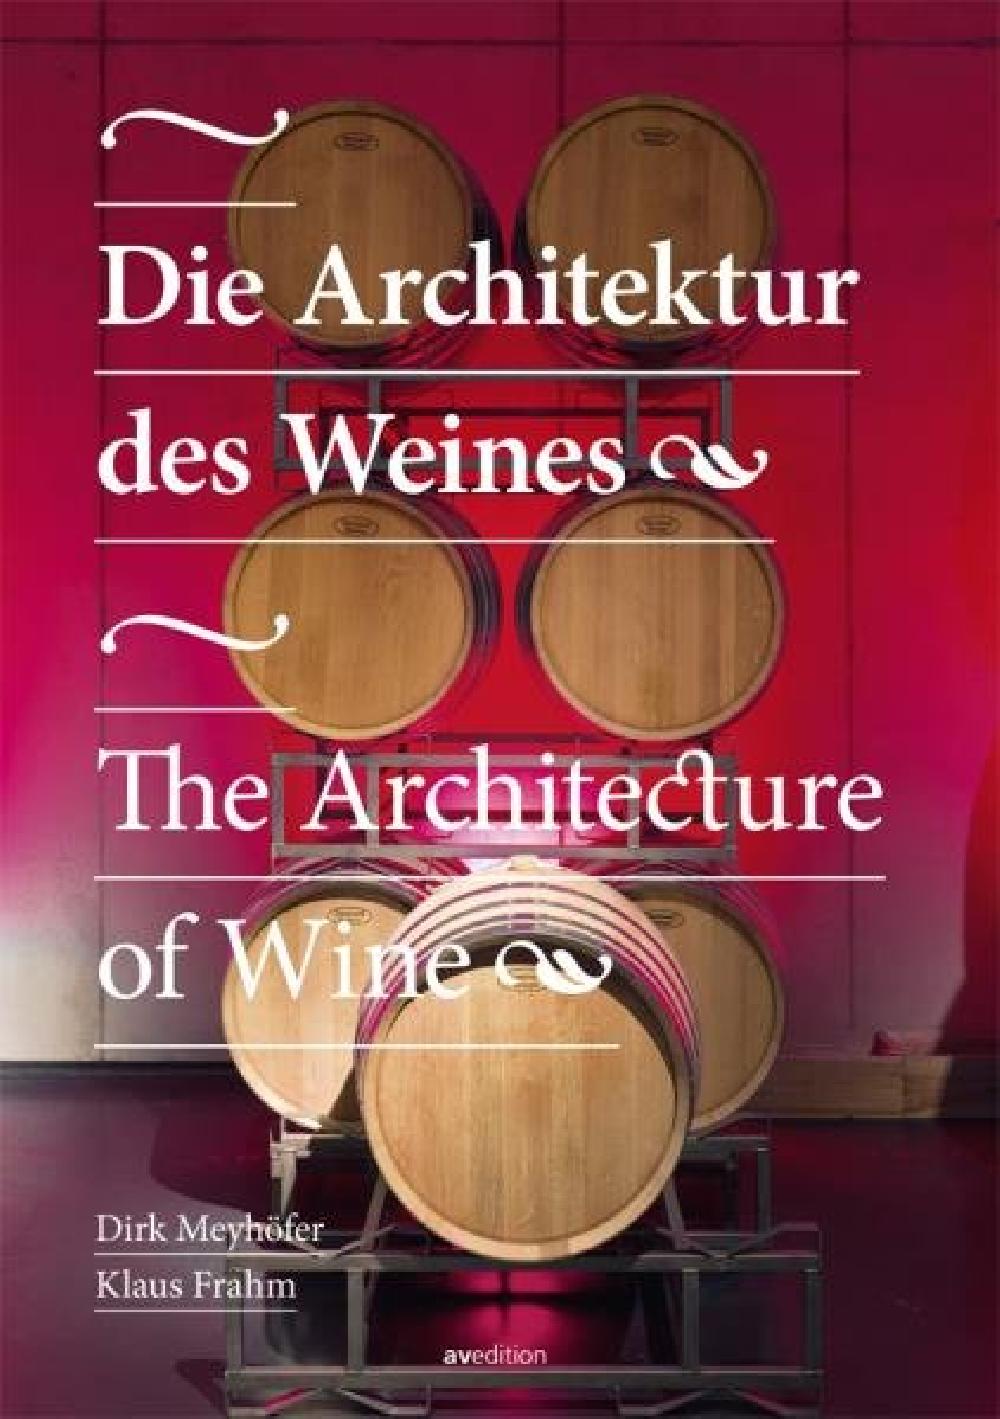 The architecture of wine